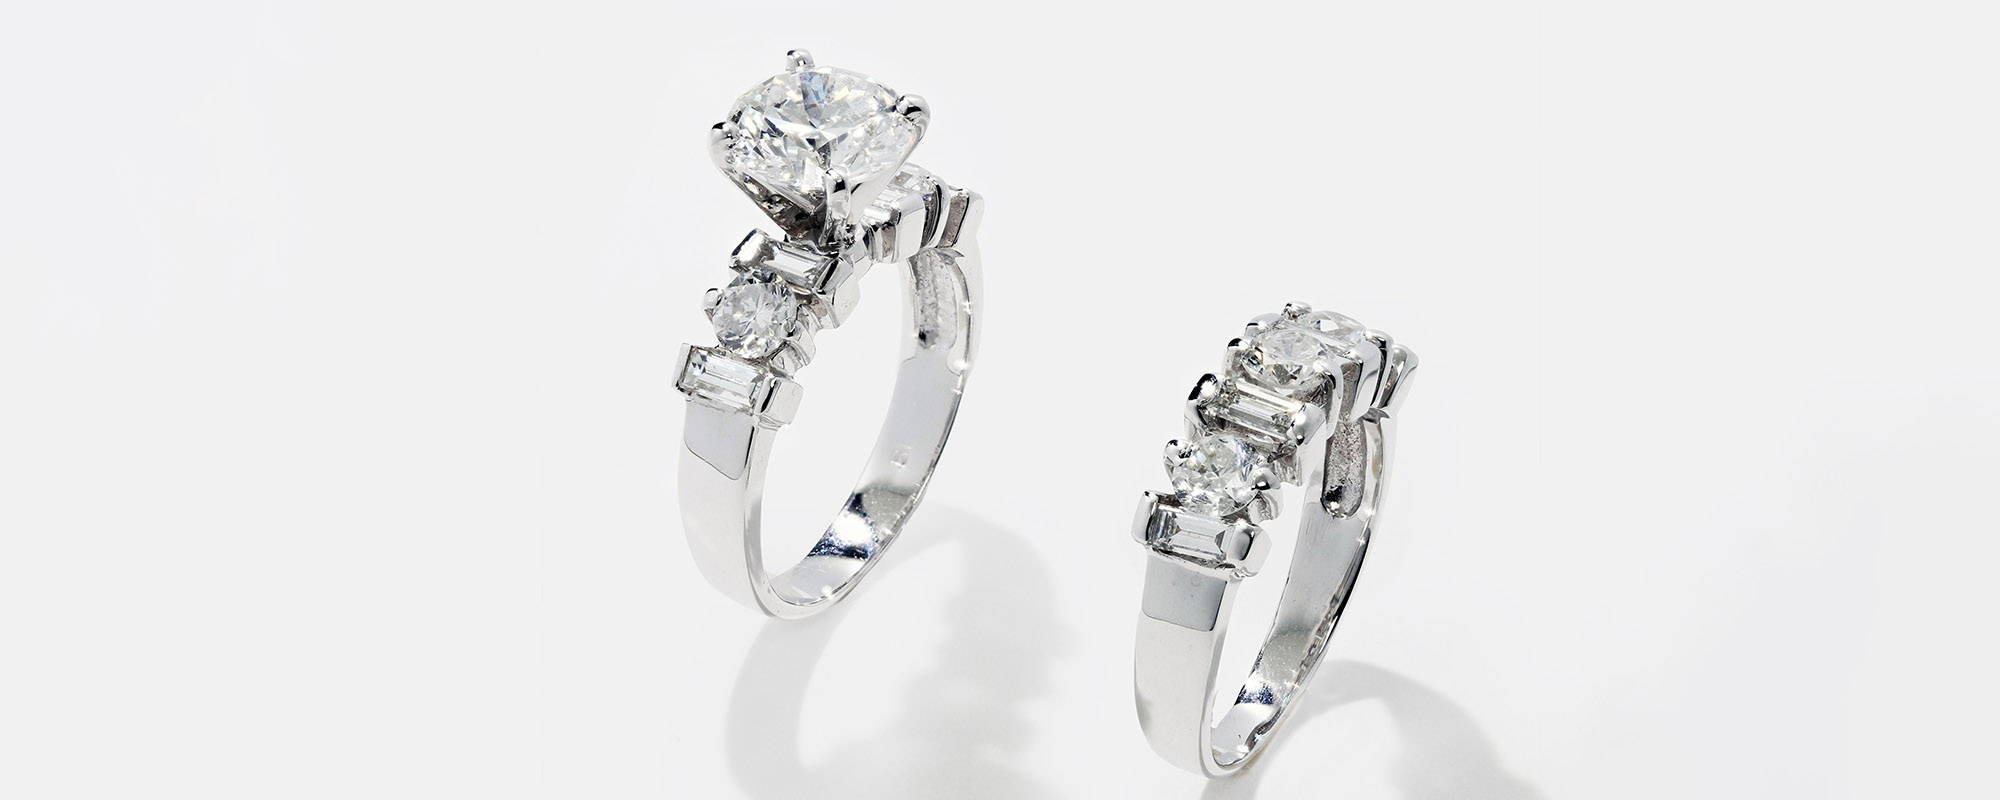 Bigger, Better, Brighter: How to Upgrade Your Wedding Ring